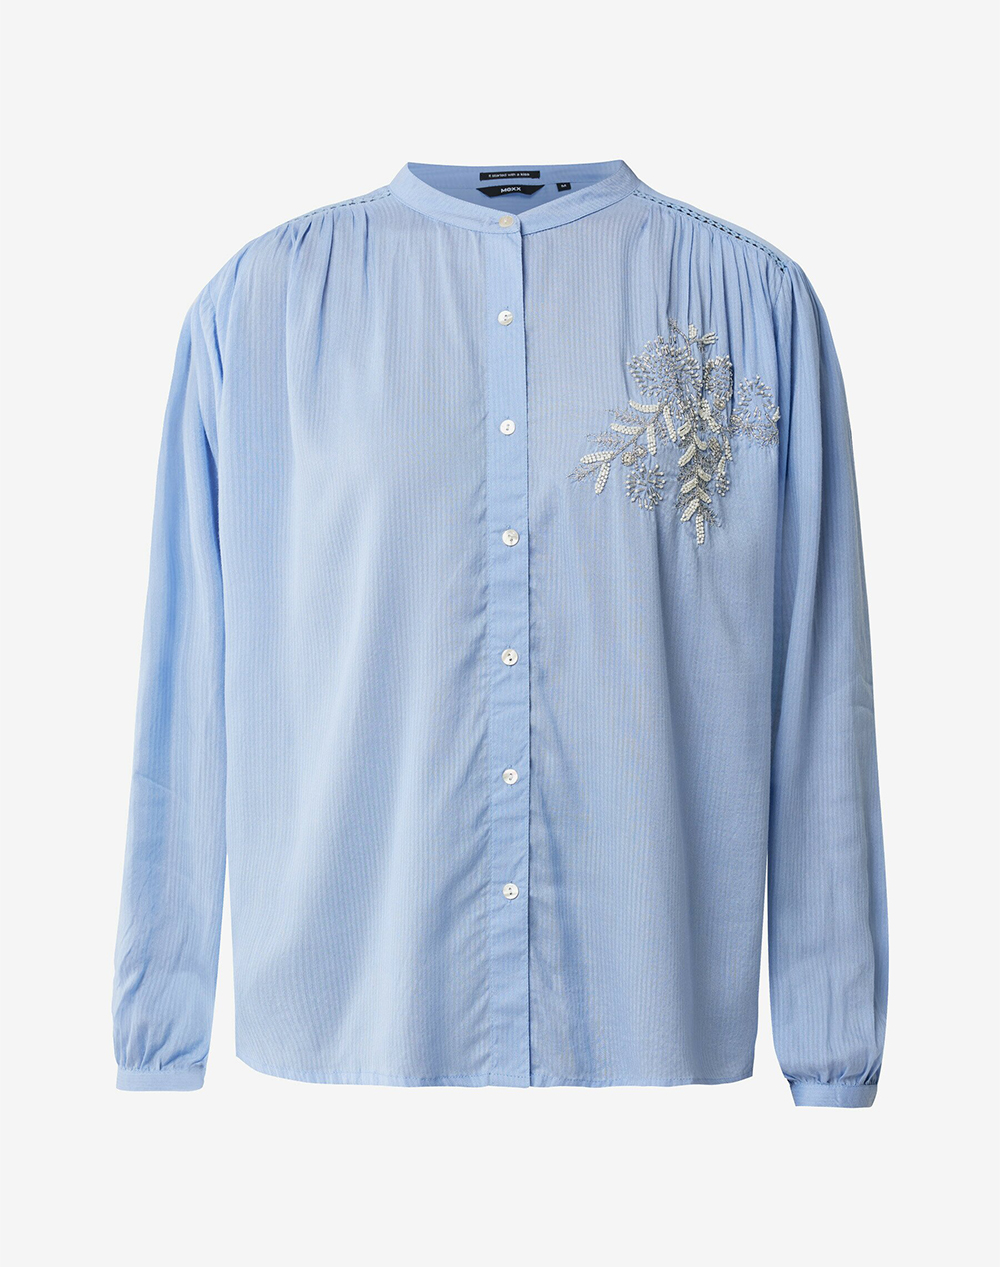 MEXX shirt with chest embroidery